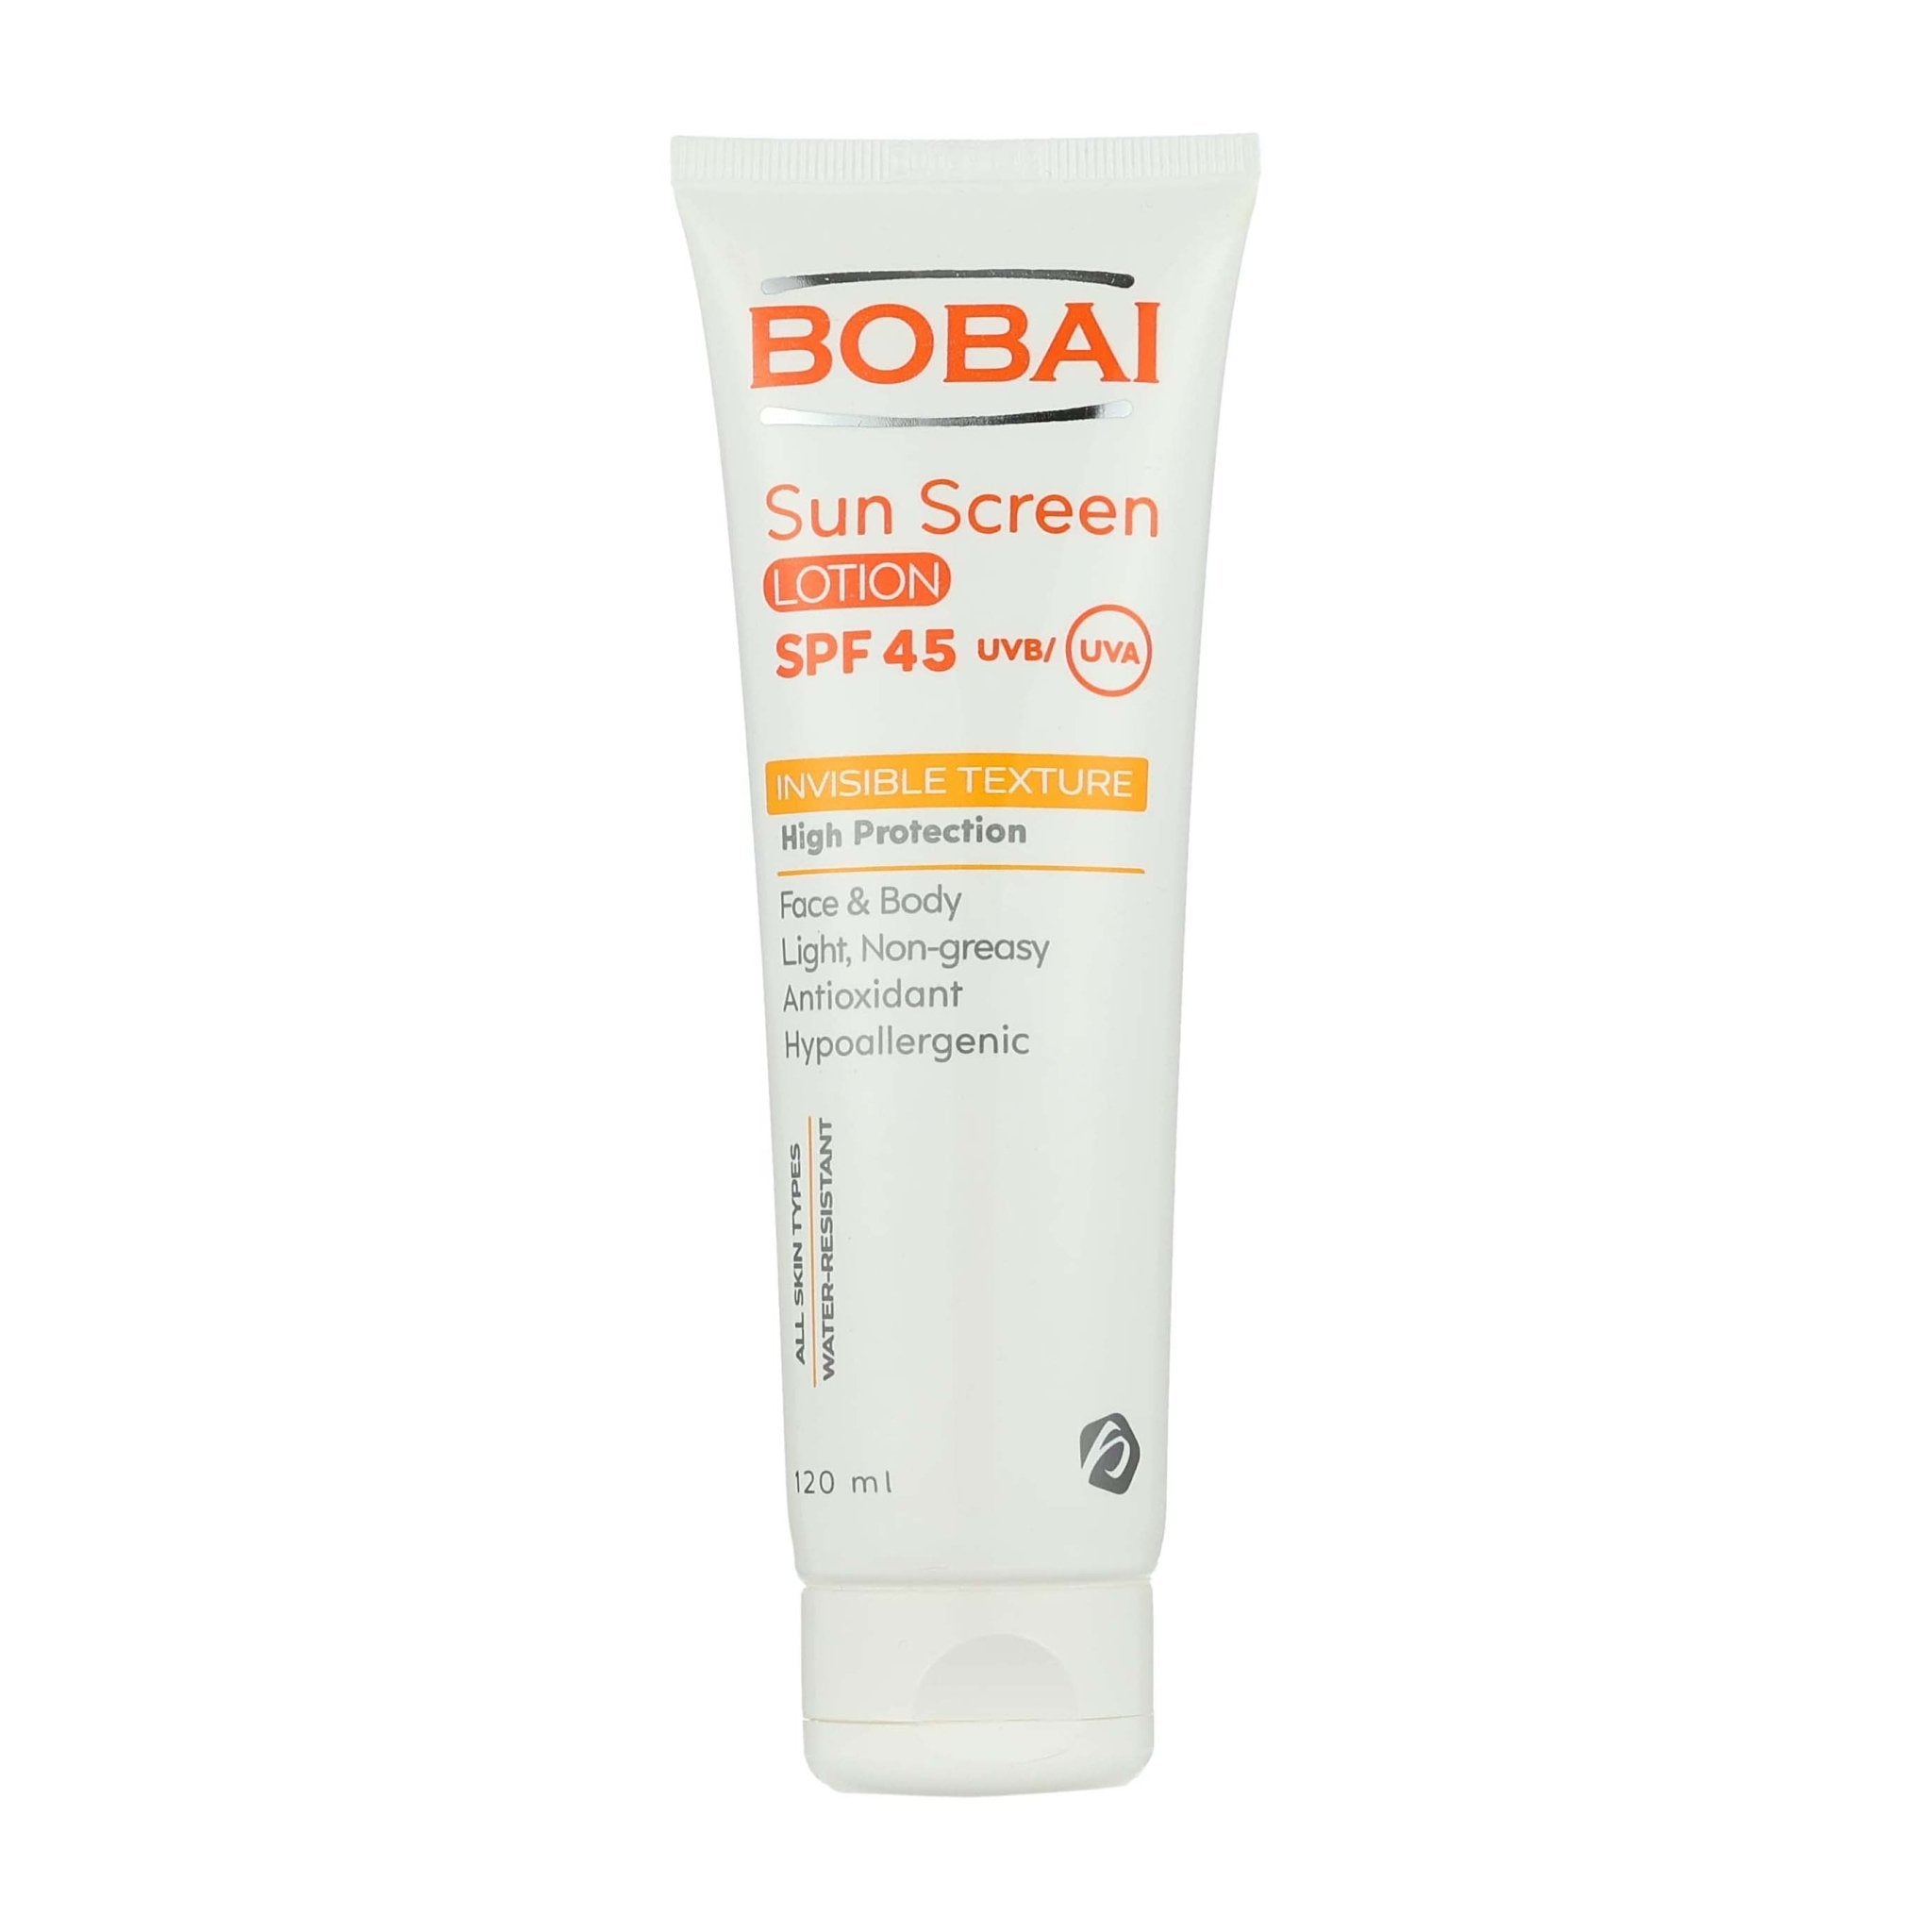 Bobai Invisible Texture SPF 45 Sunscreen Lotion - 120ml - Bloom Pharmacy